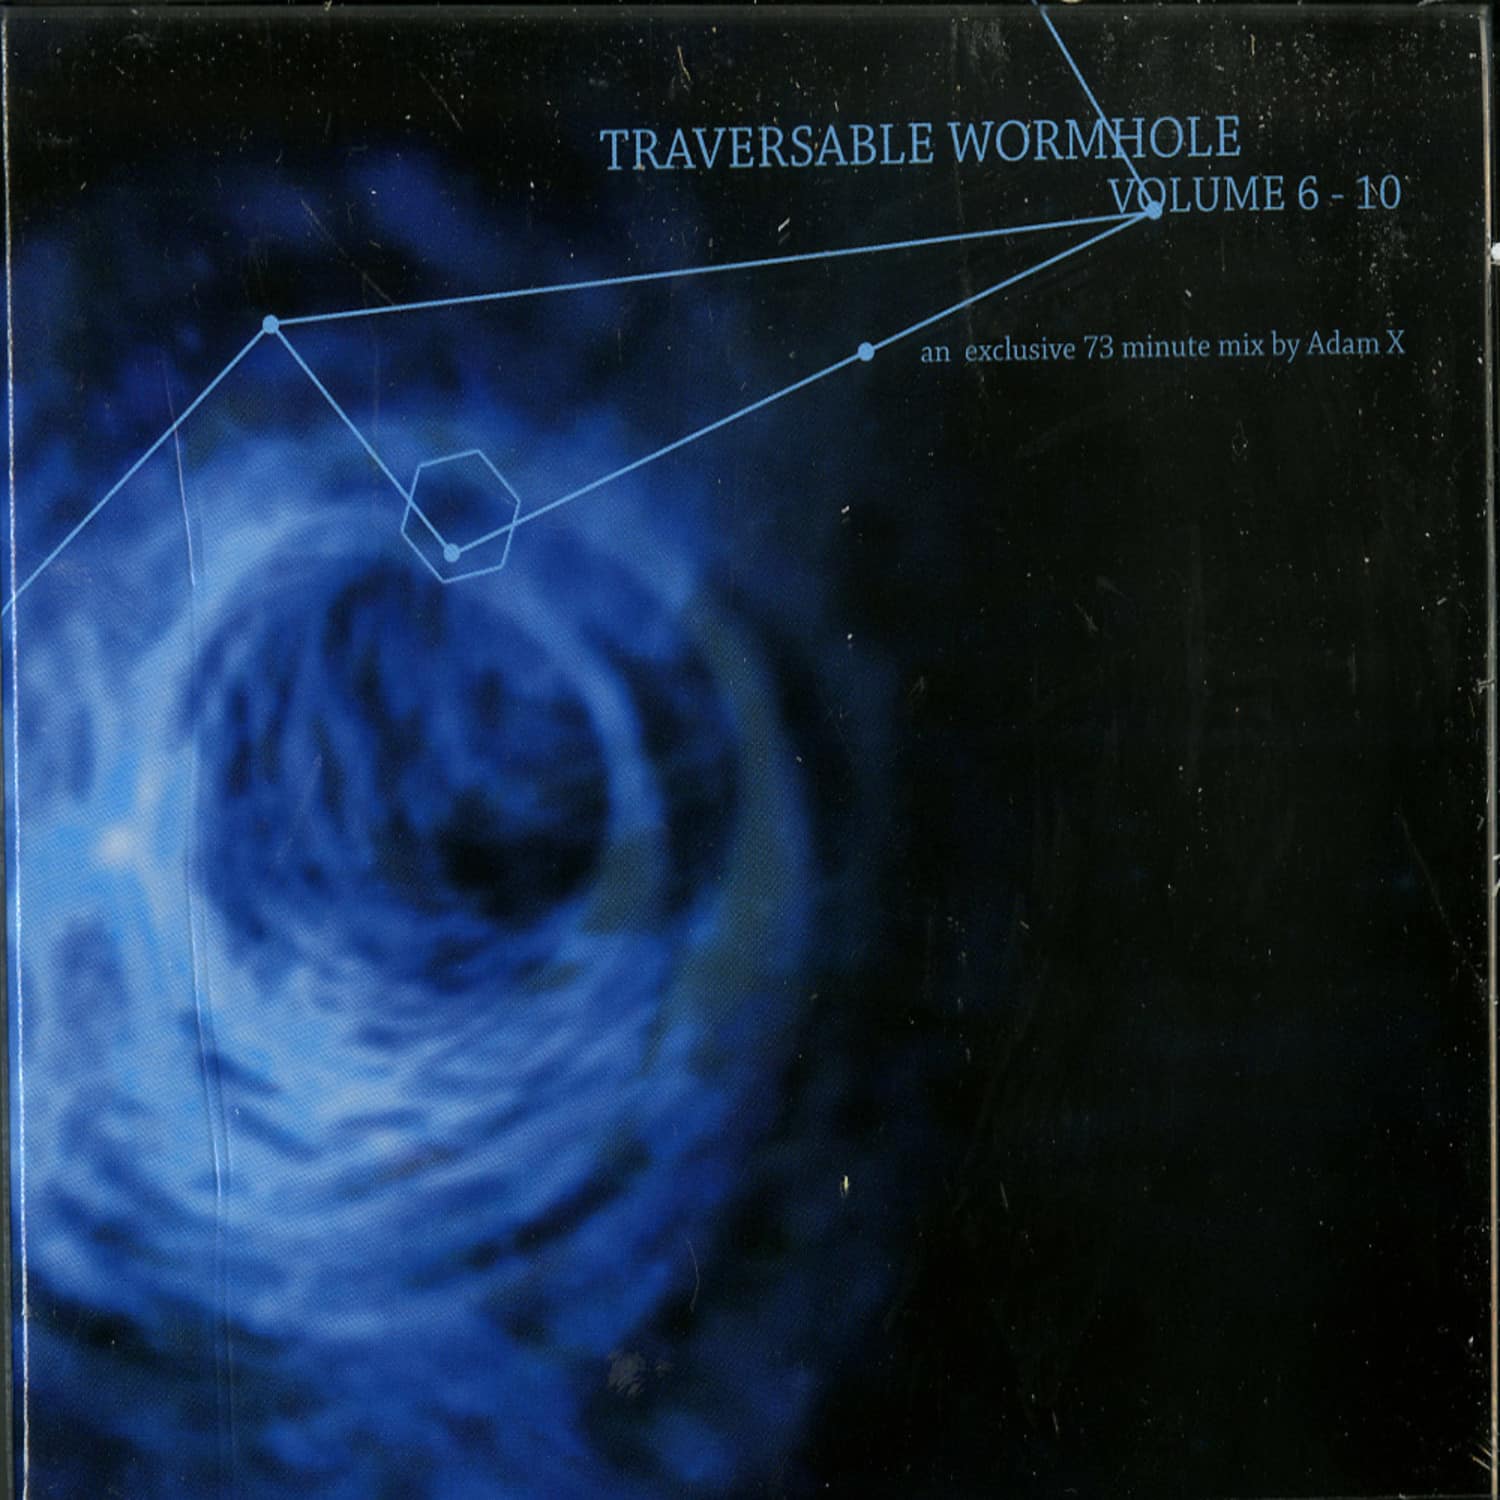 Traversable Wormhole - VOL. 6-10 MIXED BY ADAM X 